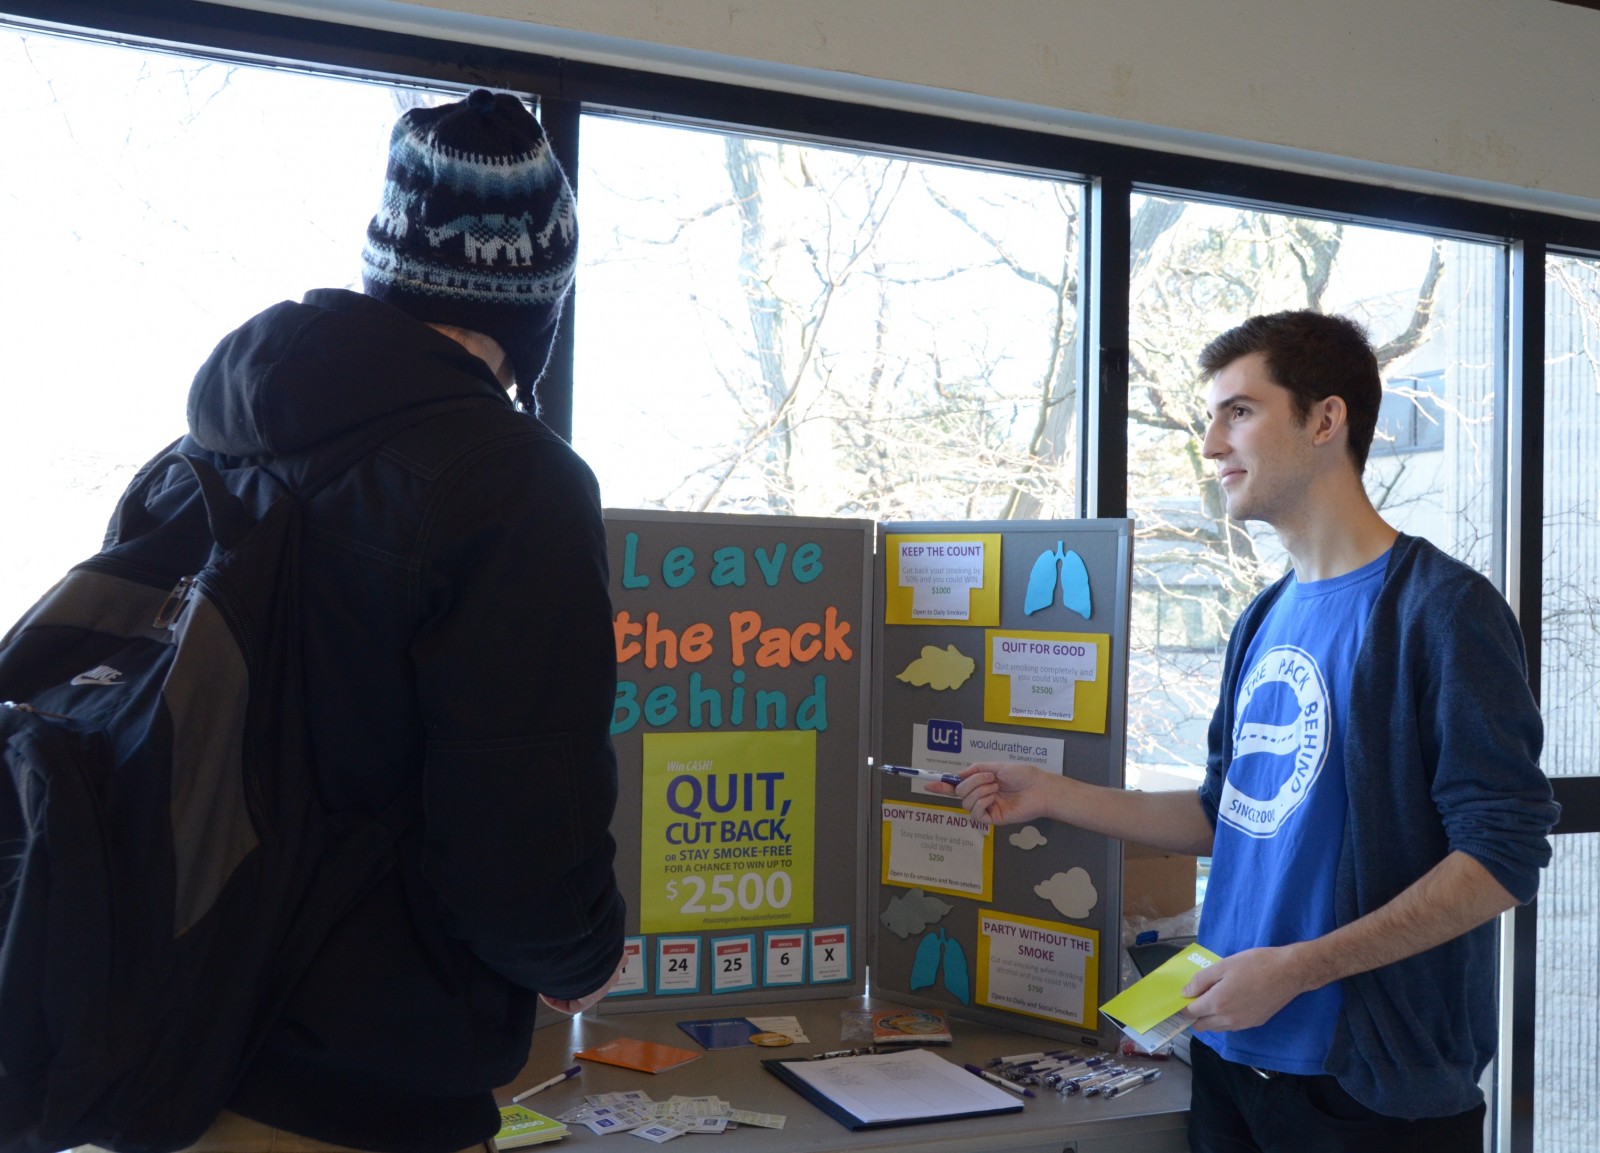 Grant Hayward, member LTPB communications team was in the Mac Chown A Block hallway this week speaking with students about strategies for quitting and the benefits of the wouldurather Contest.